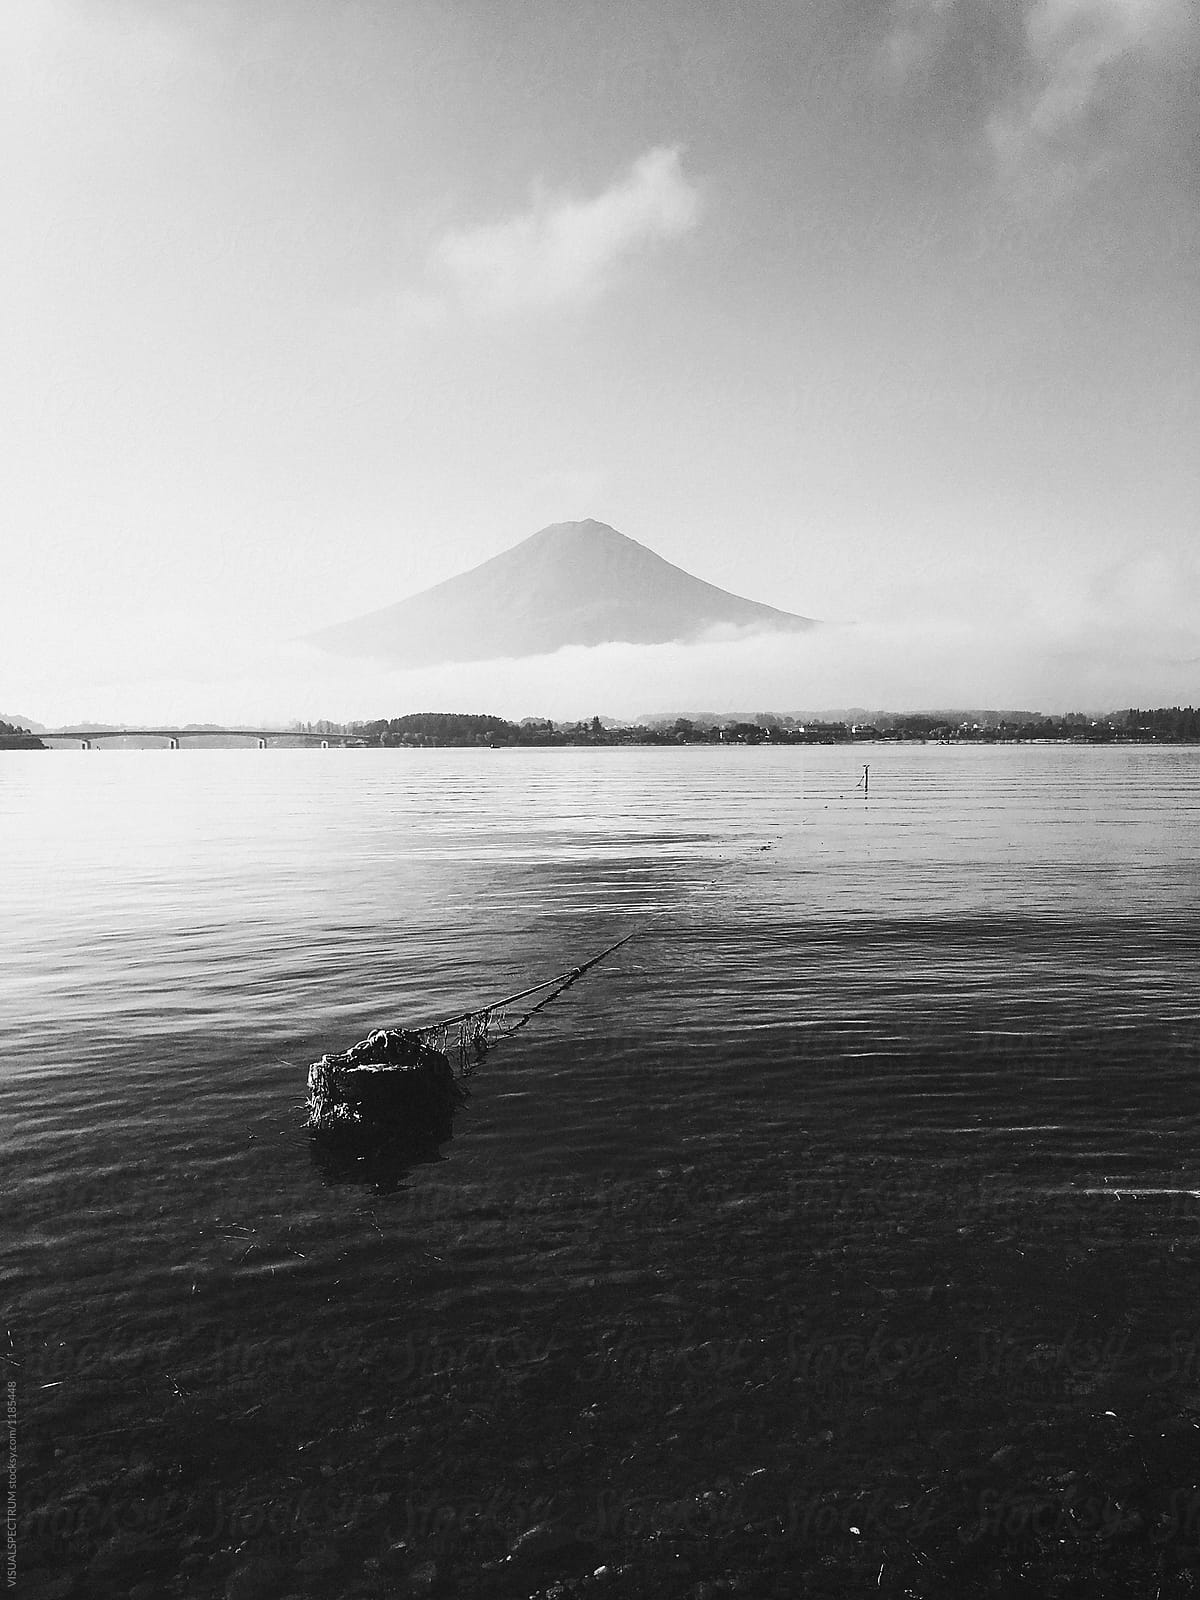 Japan - Lake Kawaguchi With Mount Fuji Surrounded by Clouds in Background